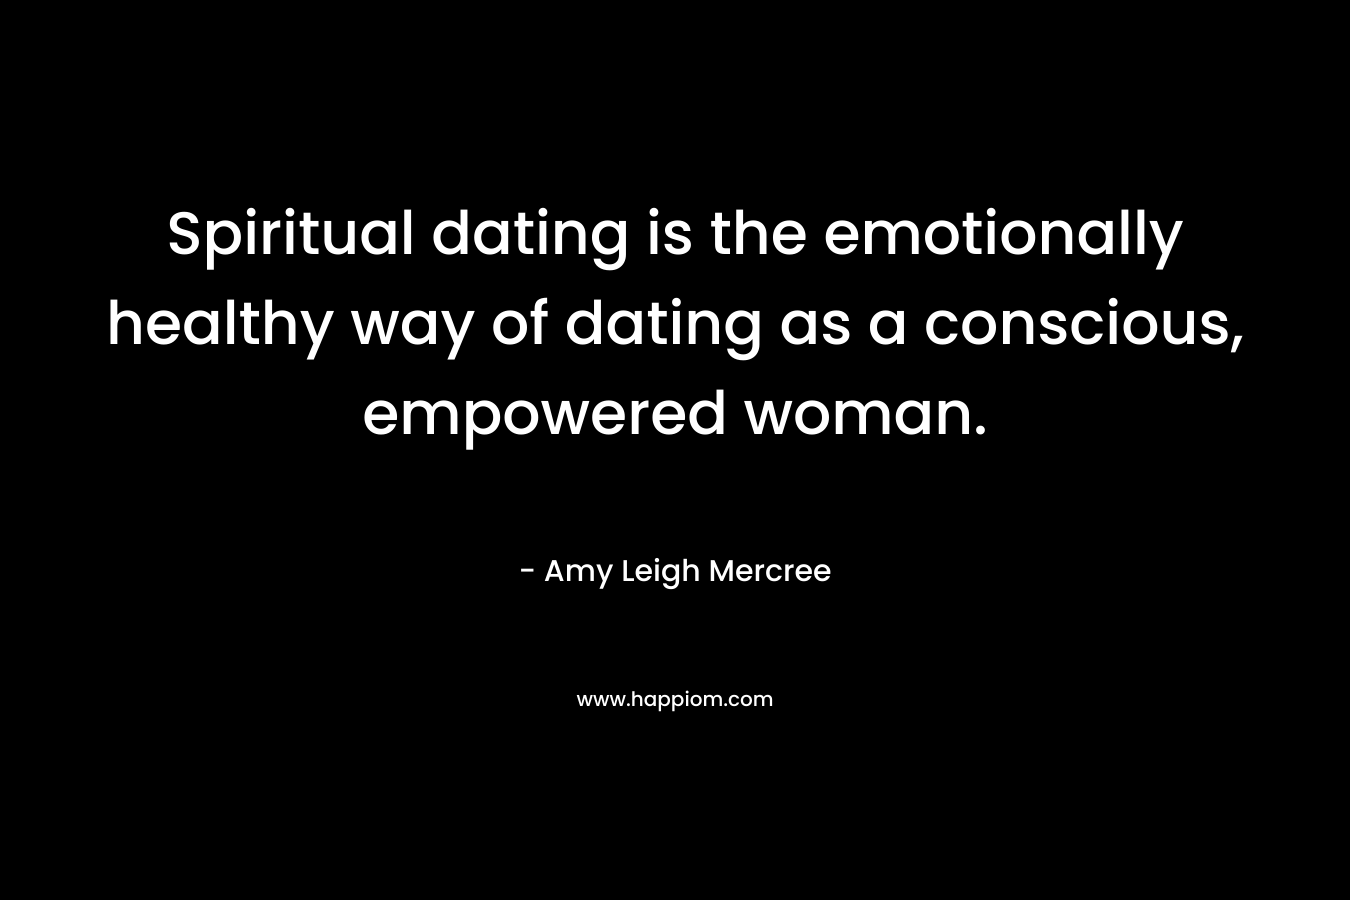 Spiritual dating is the emotionally healthy way of dating as a conscious, empowered woman.